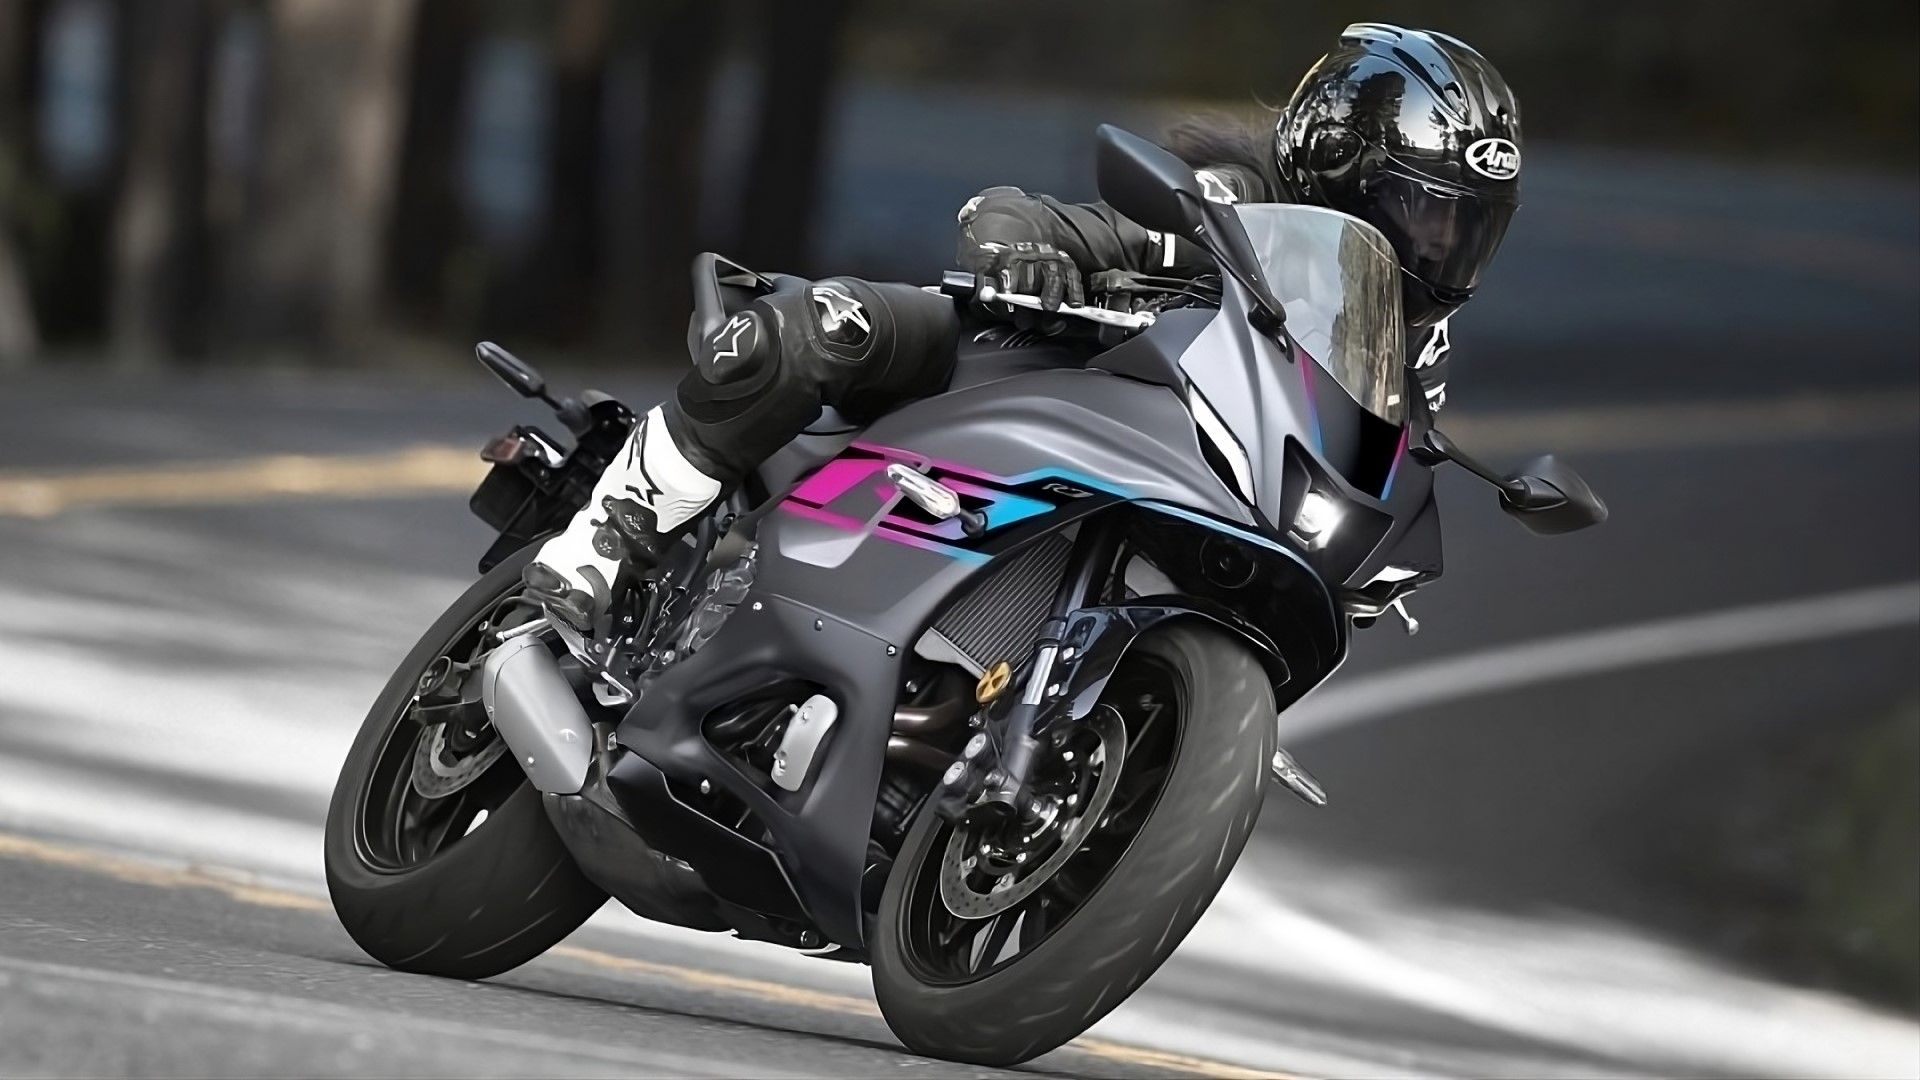 2024 Yamaha R7 in a cool color cornering view